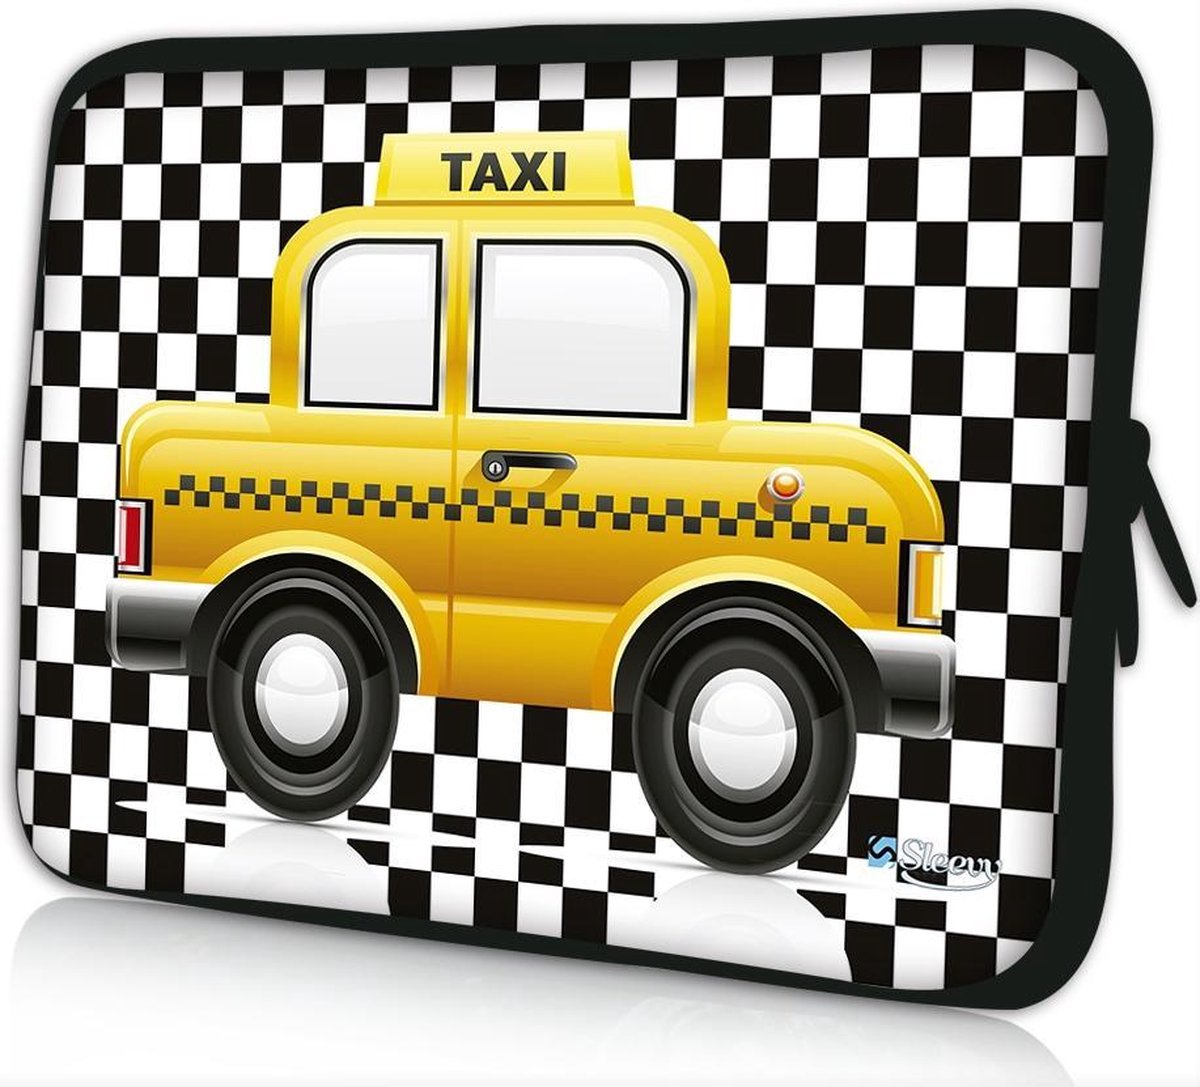 Sleevy 17,3 laptophoes taxi - laptop sleeve - Sleevy collectie 300+ designs